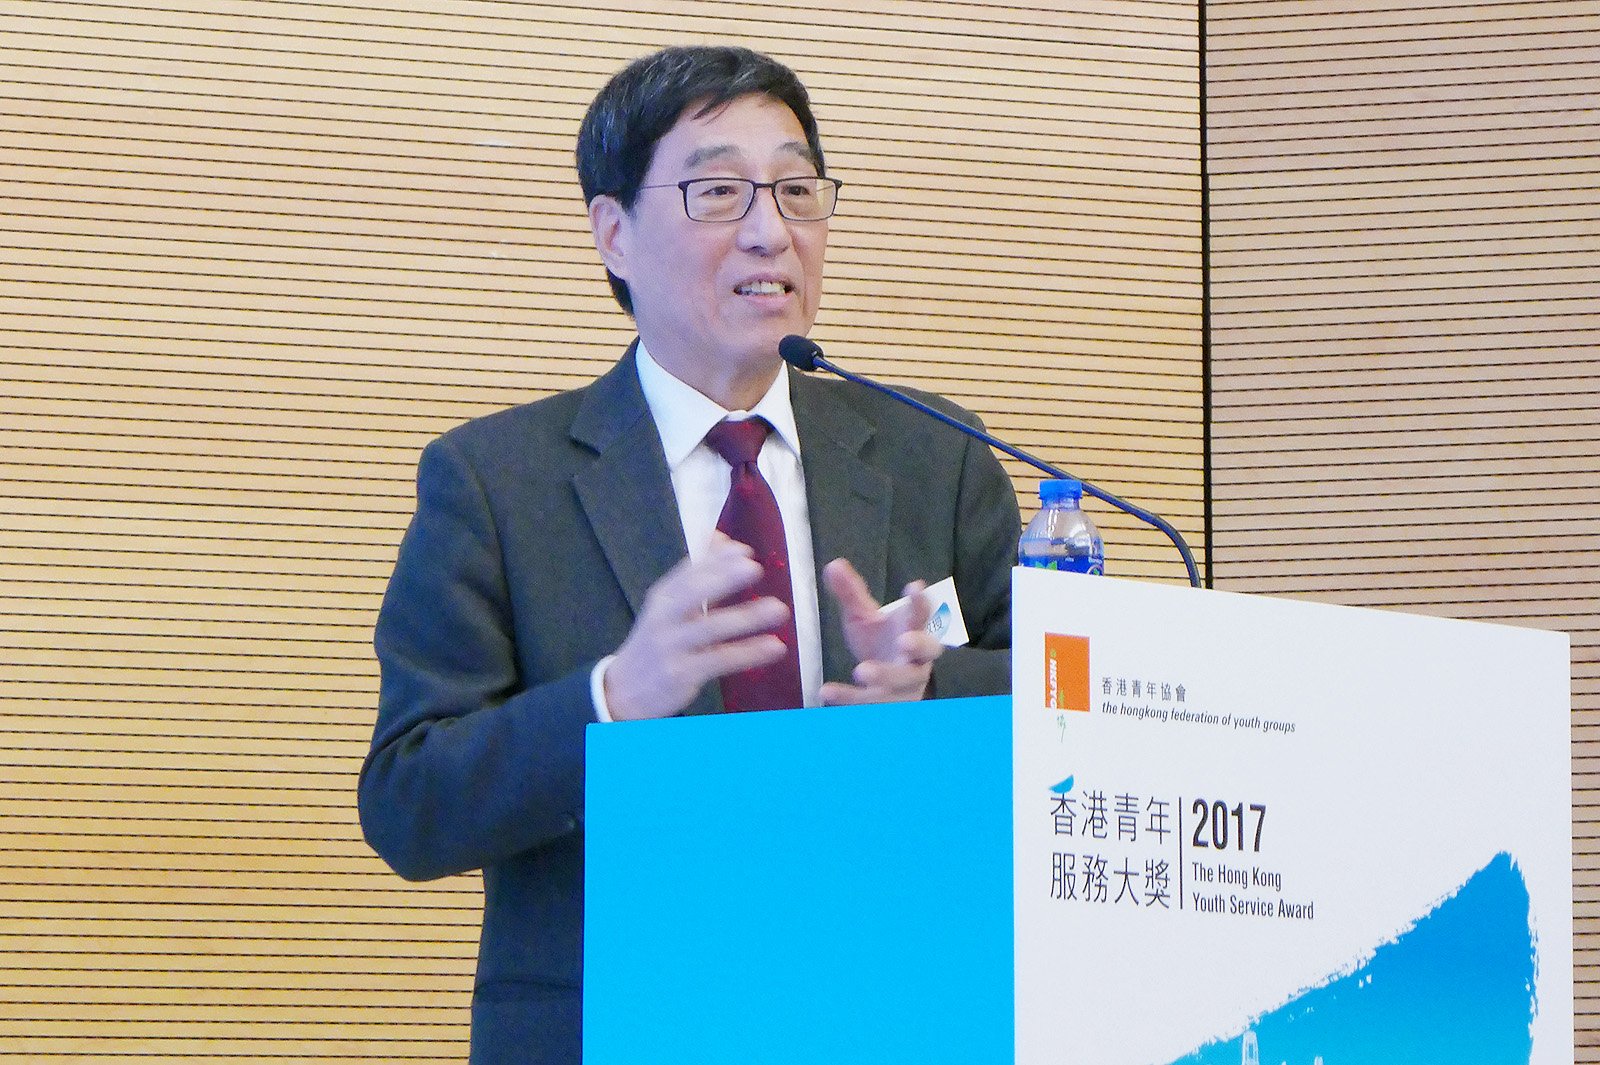 Professor Kuo delivers the keynote speech at The Hong Kong Youth Service Award 2017 presentation ceremony.   